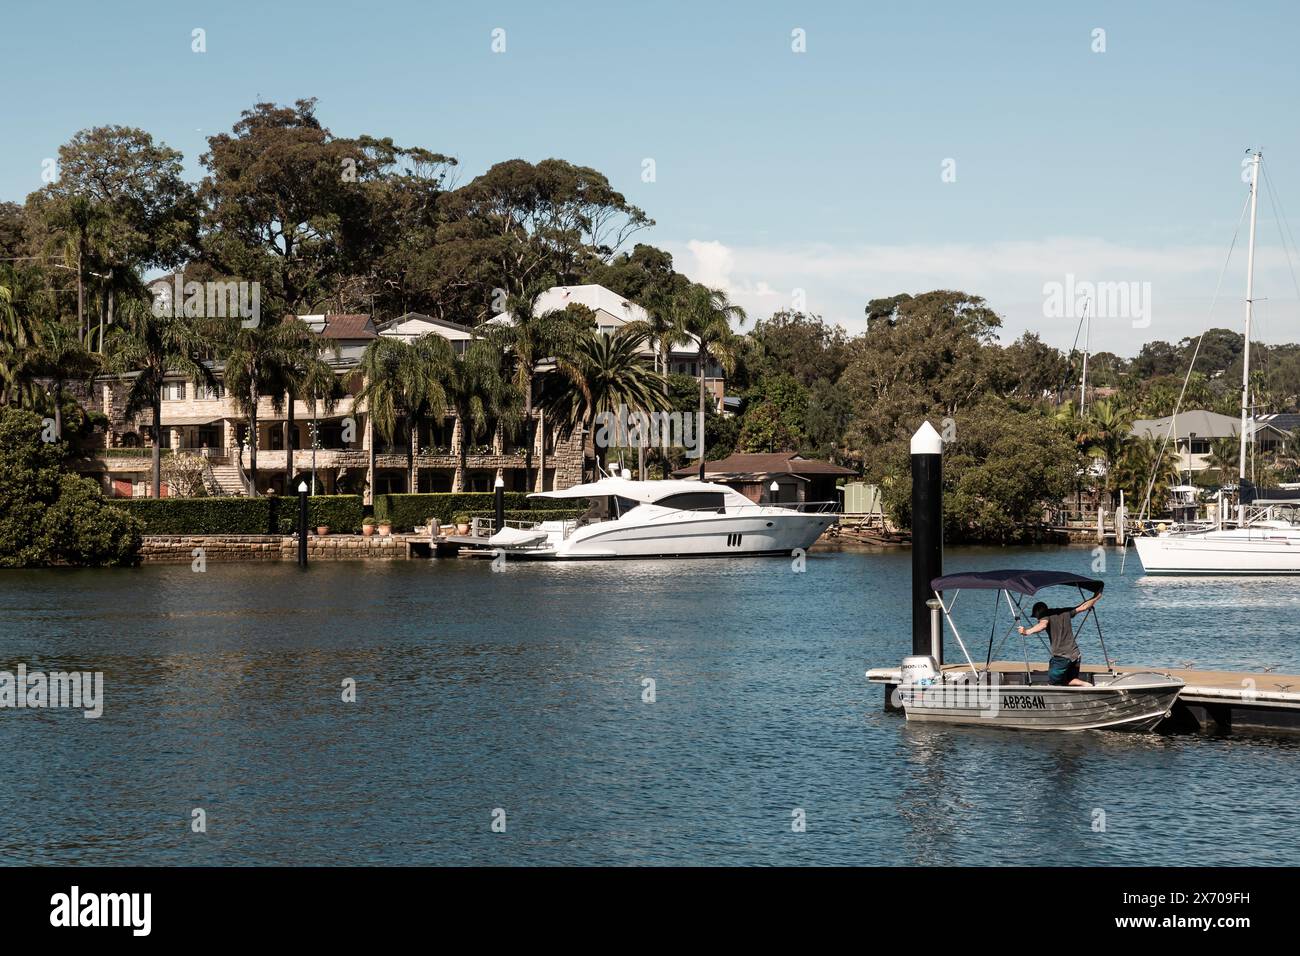 Residential properties overlooking Bayview Dog Park, Rowland Reserve, Bayview, Sydney. Stock Photo